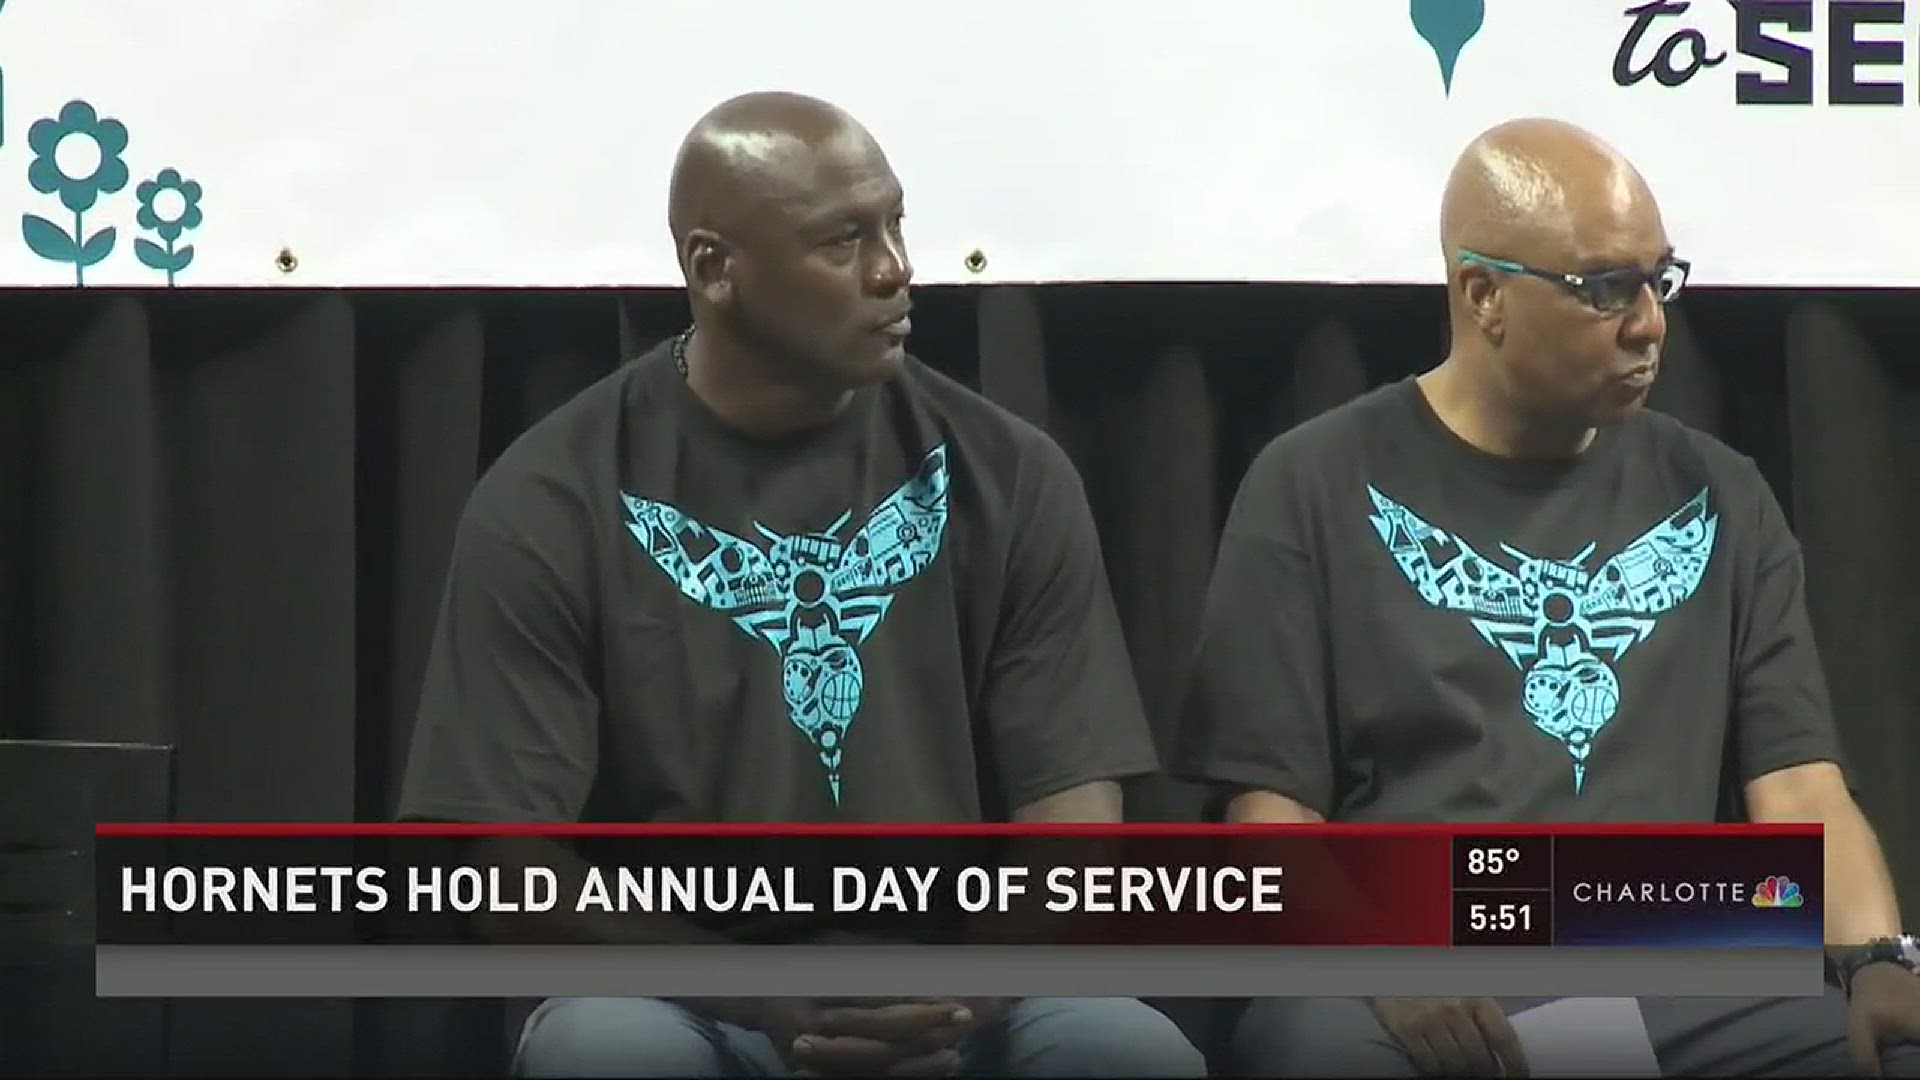 The Hornets are giving back to the Charlotte community.